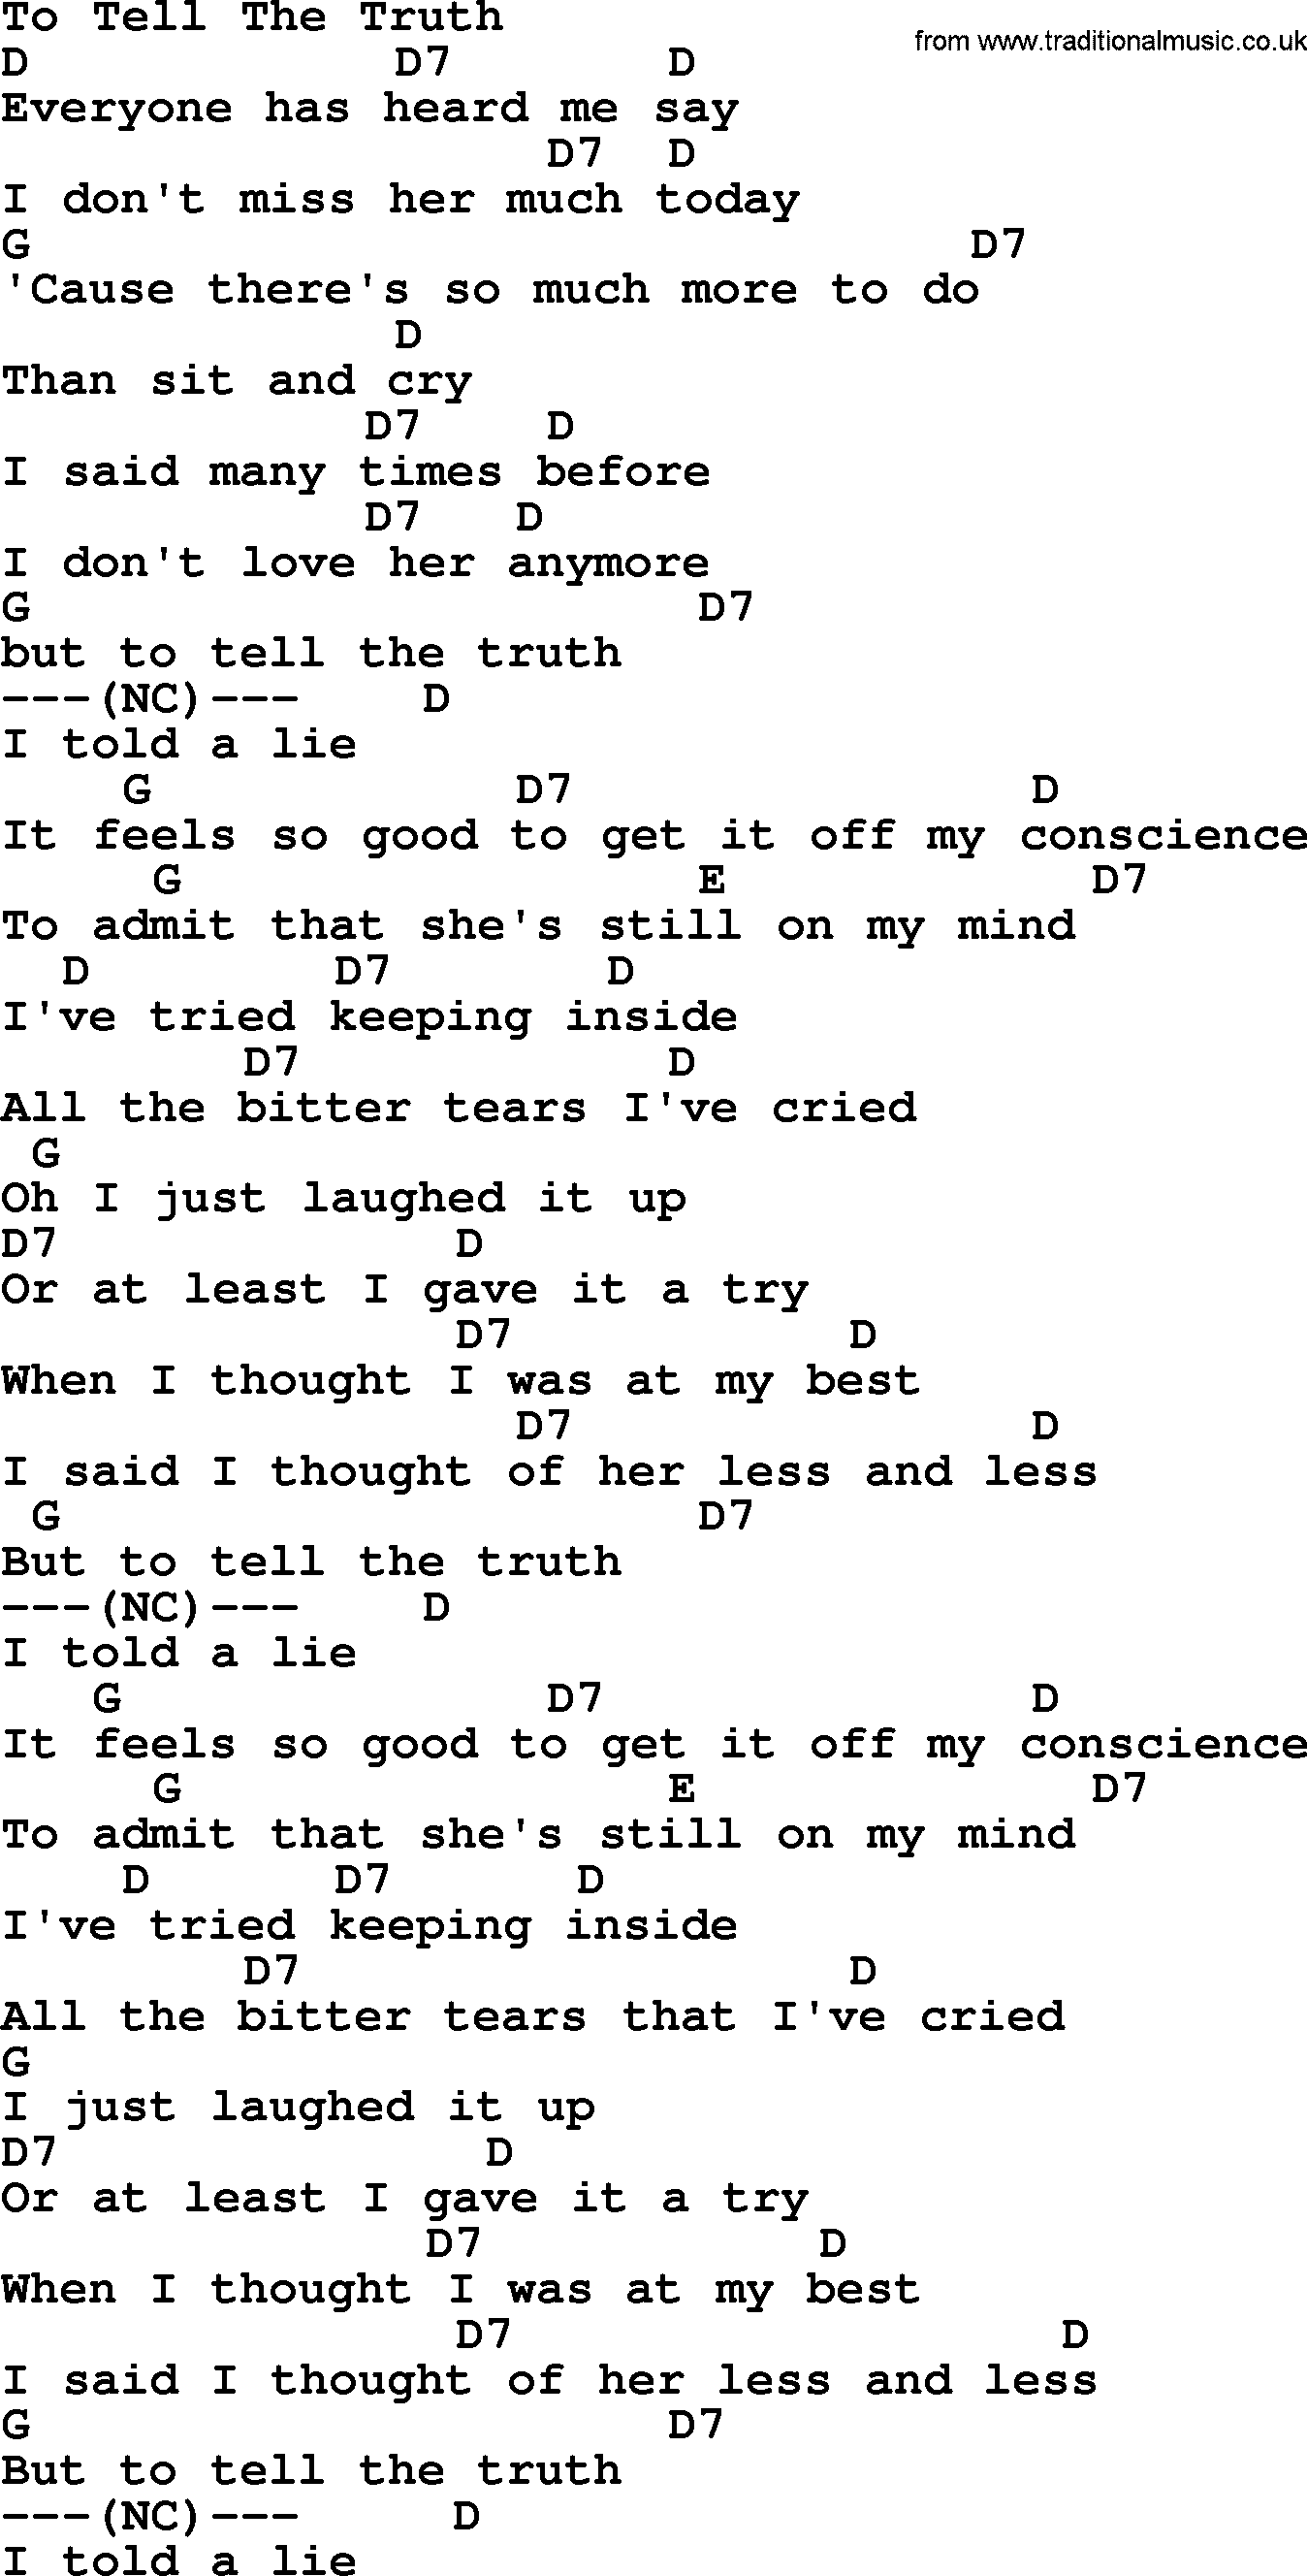 Bluegrass song: To Tell The Truth, lyrics and chords